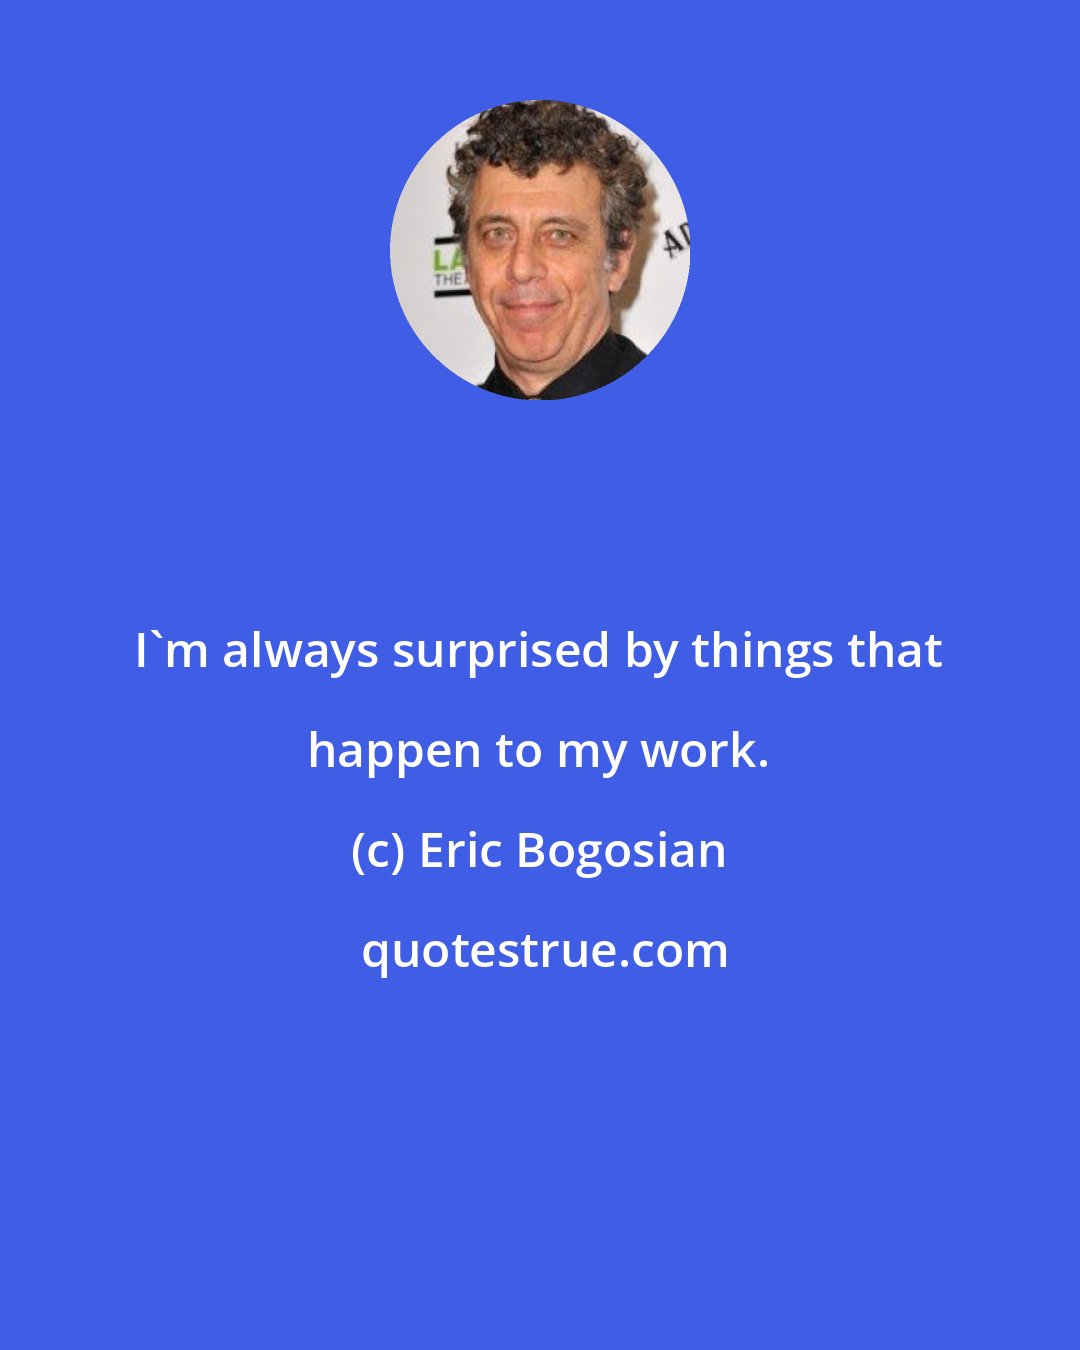 Eric Bogosian: I'm always surprised by things that happen to my work.